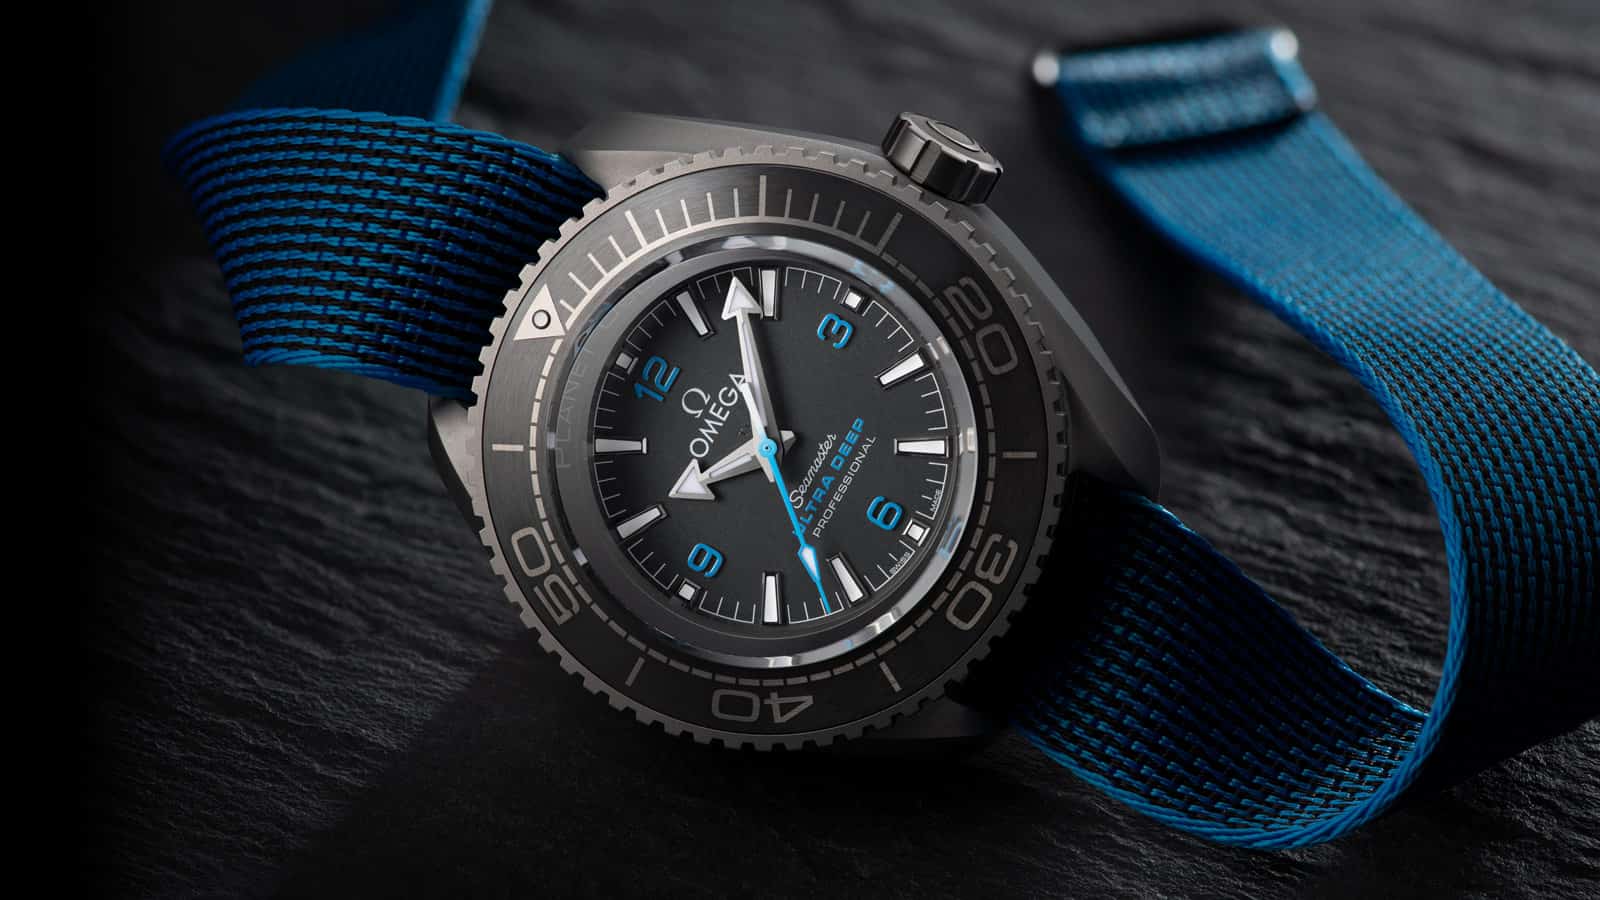 Introducing the Seamaster Planet Ocean Ultra Deep Professional, the Record-Breaking Omega at the Bottom of the Ocean